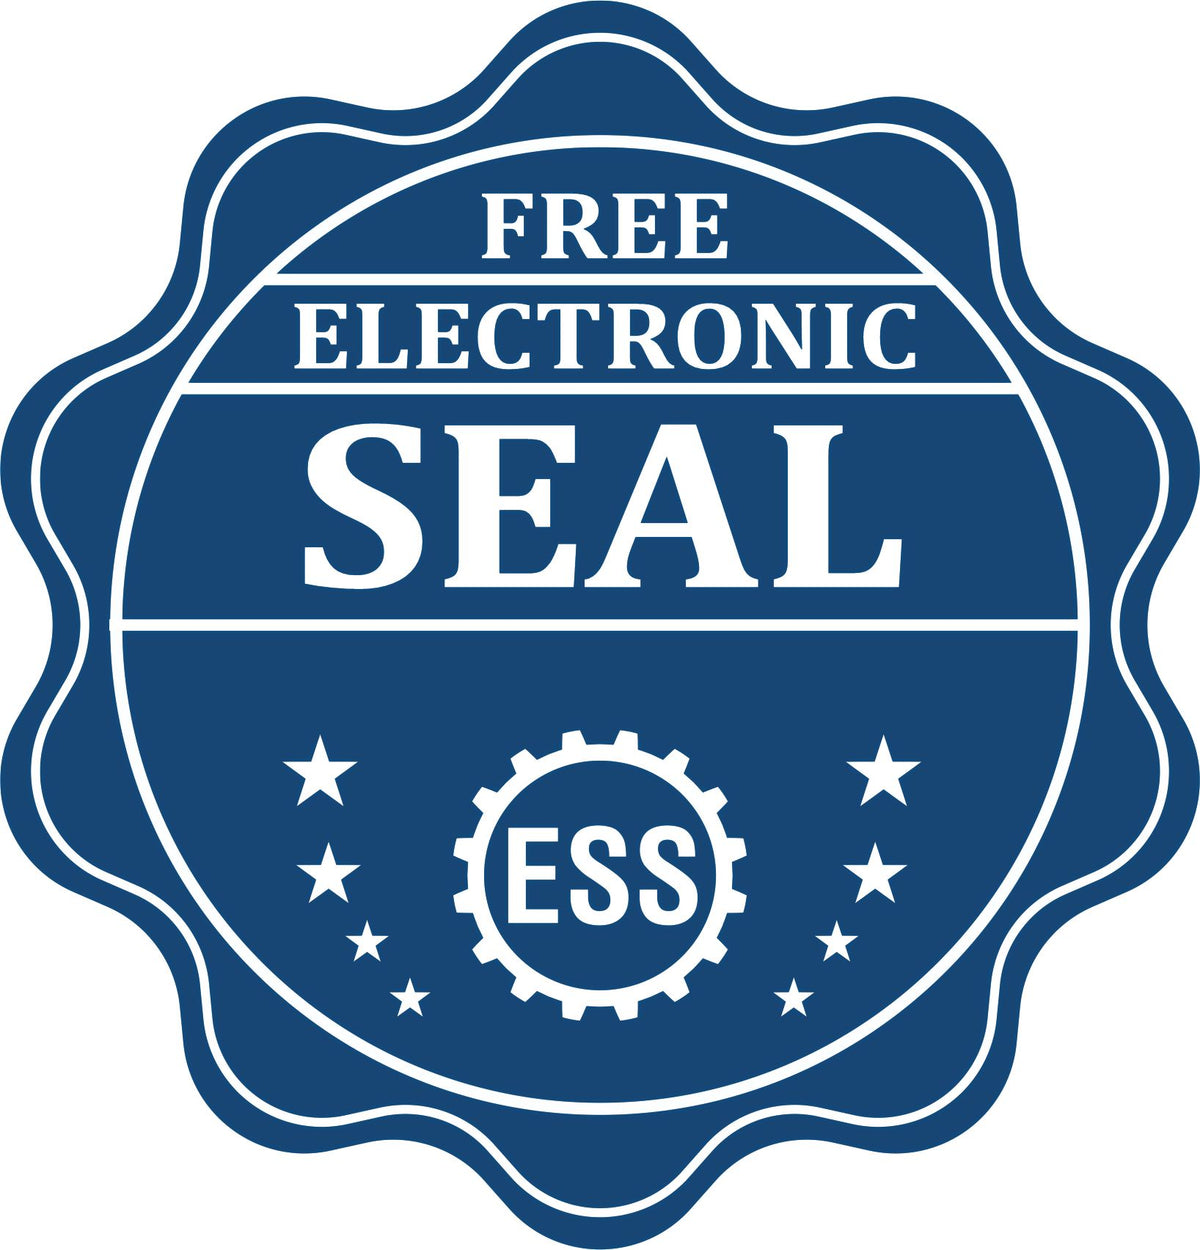 A badge showing a free electronic seal for the Soft Wisconsin Professional Geologist Seal with stars and the ESS gear on the emblem.